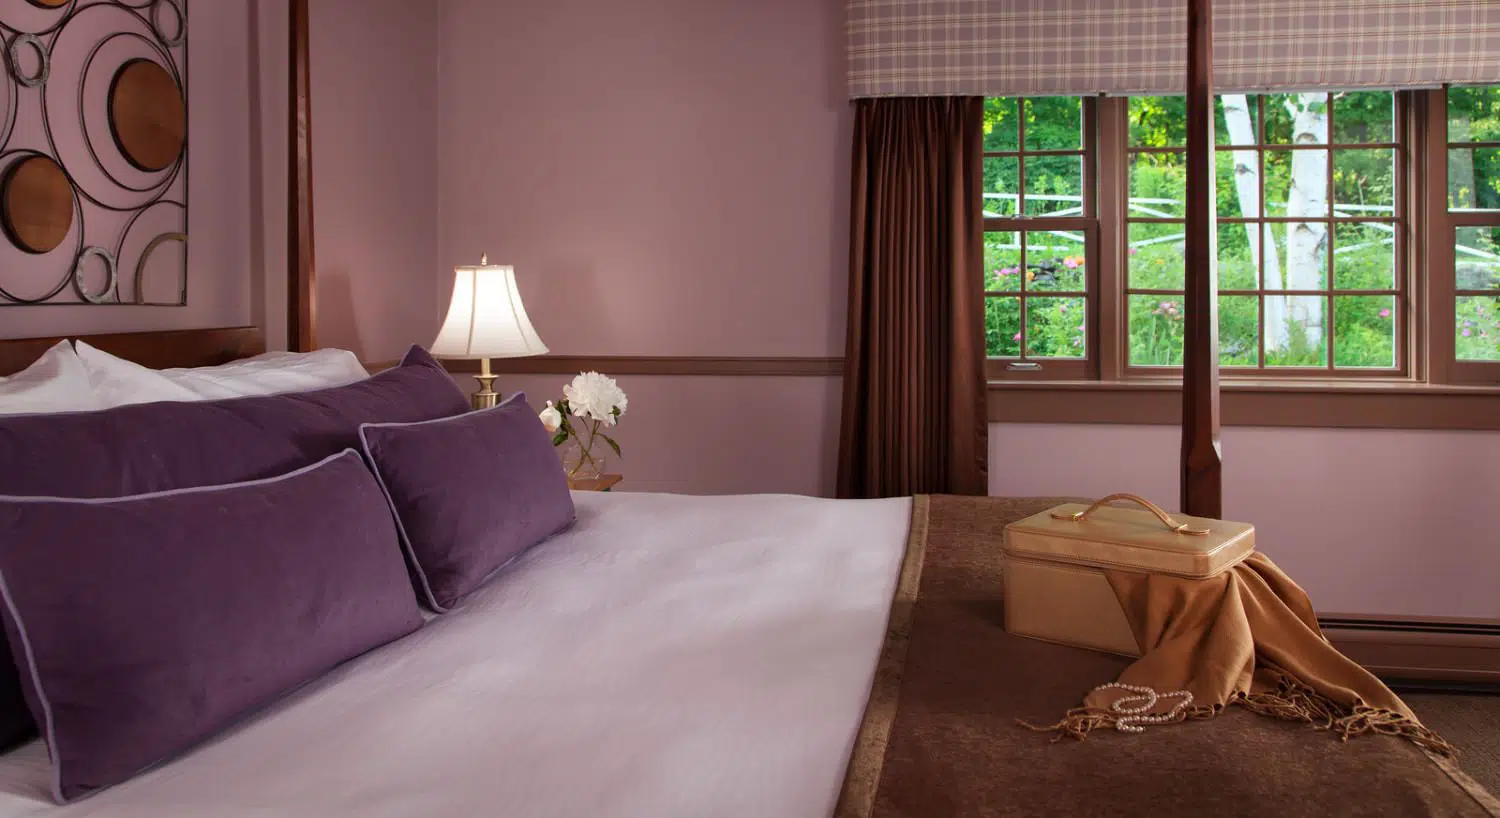 Bedroom with dark wooden four-poster bed, white bedding, purple pillows, brown blanket, and lavendar walls